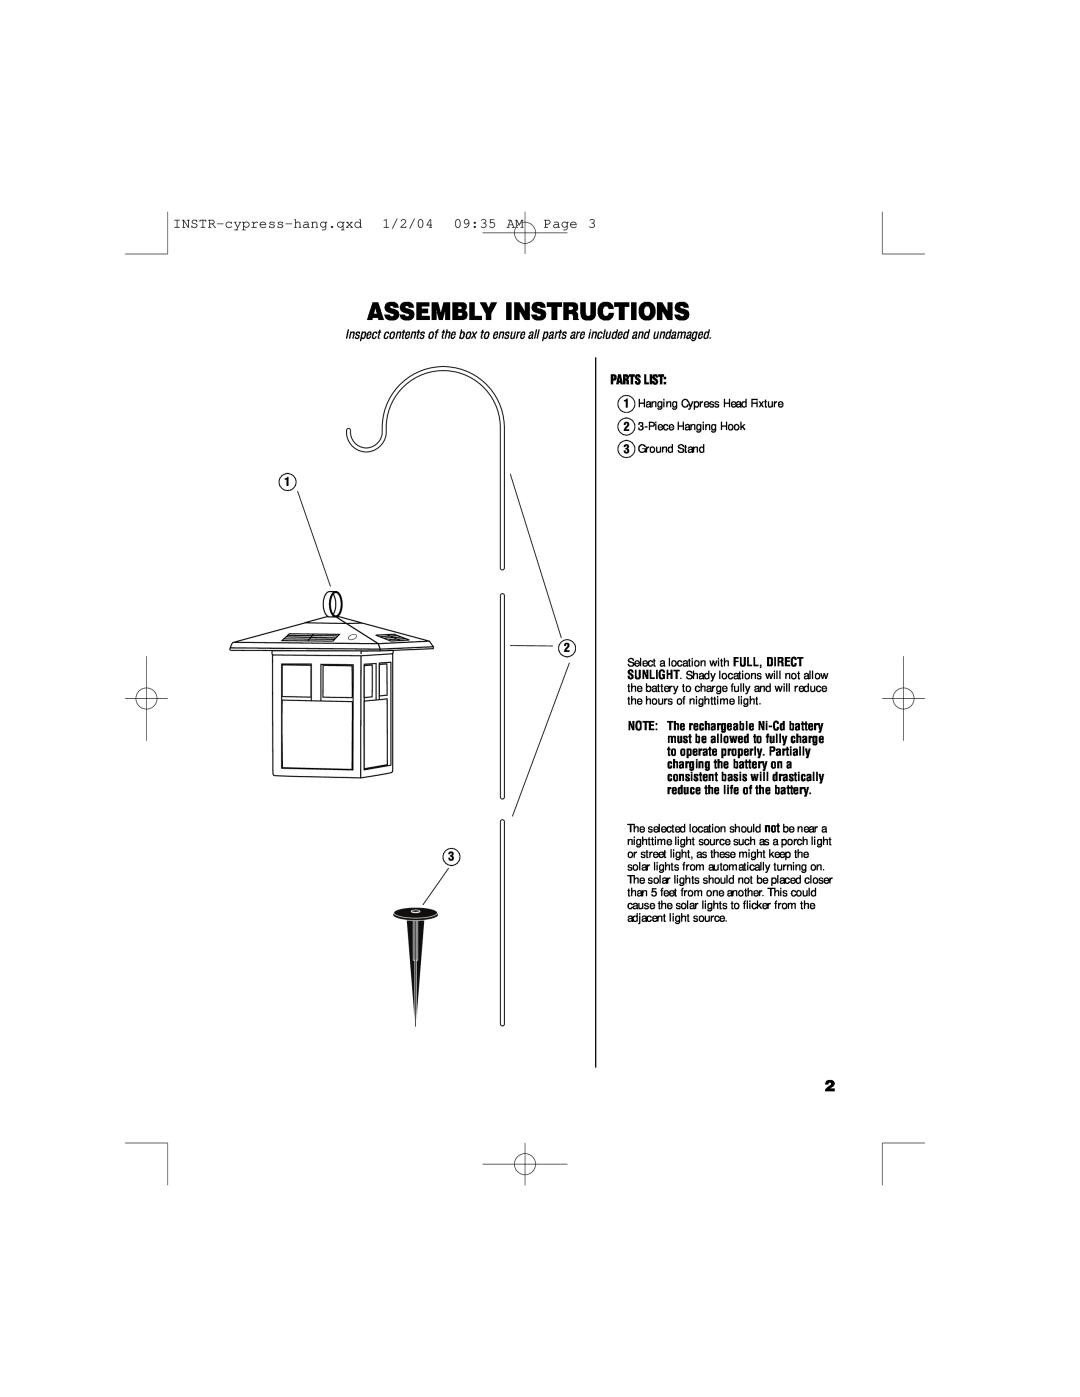 Brinkmann 822-1526-2 owner manual Assembly Instructions, Parts List, INSTR-cypress-hang.qxd1/2/04 09 35 AM Page 